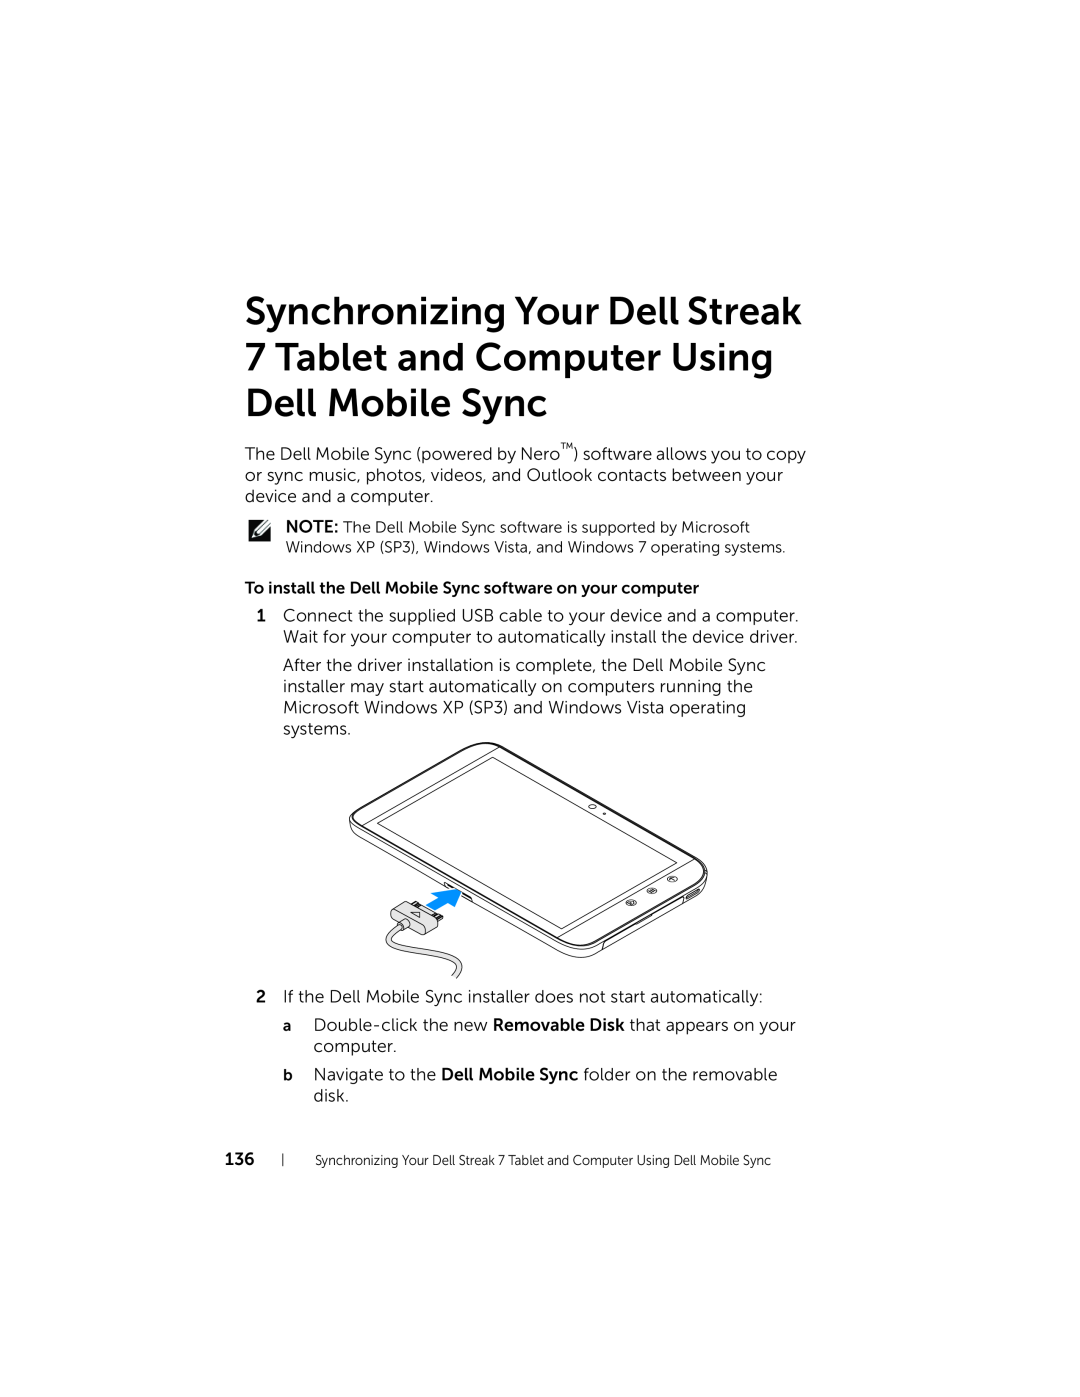 Dell user manual Synchronizing Your Dell Streak 7 Tablet and Computer Using, Dell Mobile Sync 